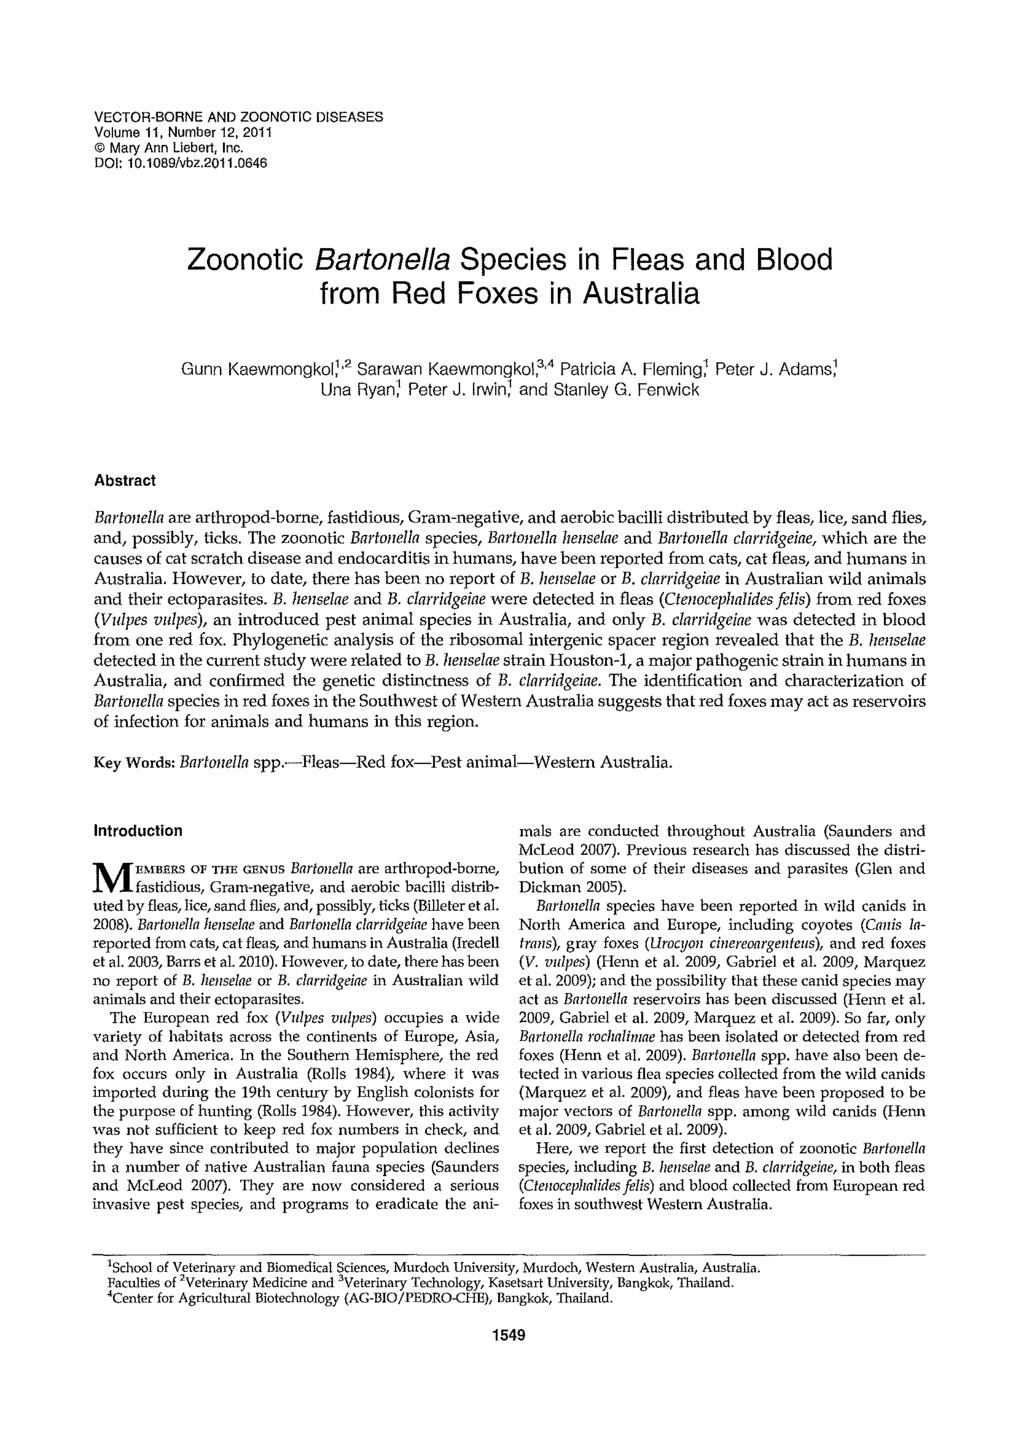 VECTOR-BORNE AND ZOONOTIC DISEASES Volume 11. Number 12. 2011 Mary Ann Liebert, Inc. 001: 10.10B9/vbz.2011.0646 Zoonotic Bartonella Species in Fleas and Blood from Red Foxes in Australia Gunn Kaewmongkol;,2 Sarawan Kaewmongkol,',4 Patricia A.